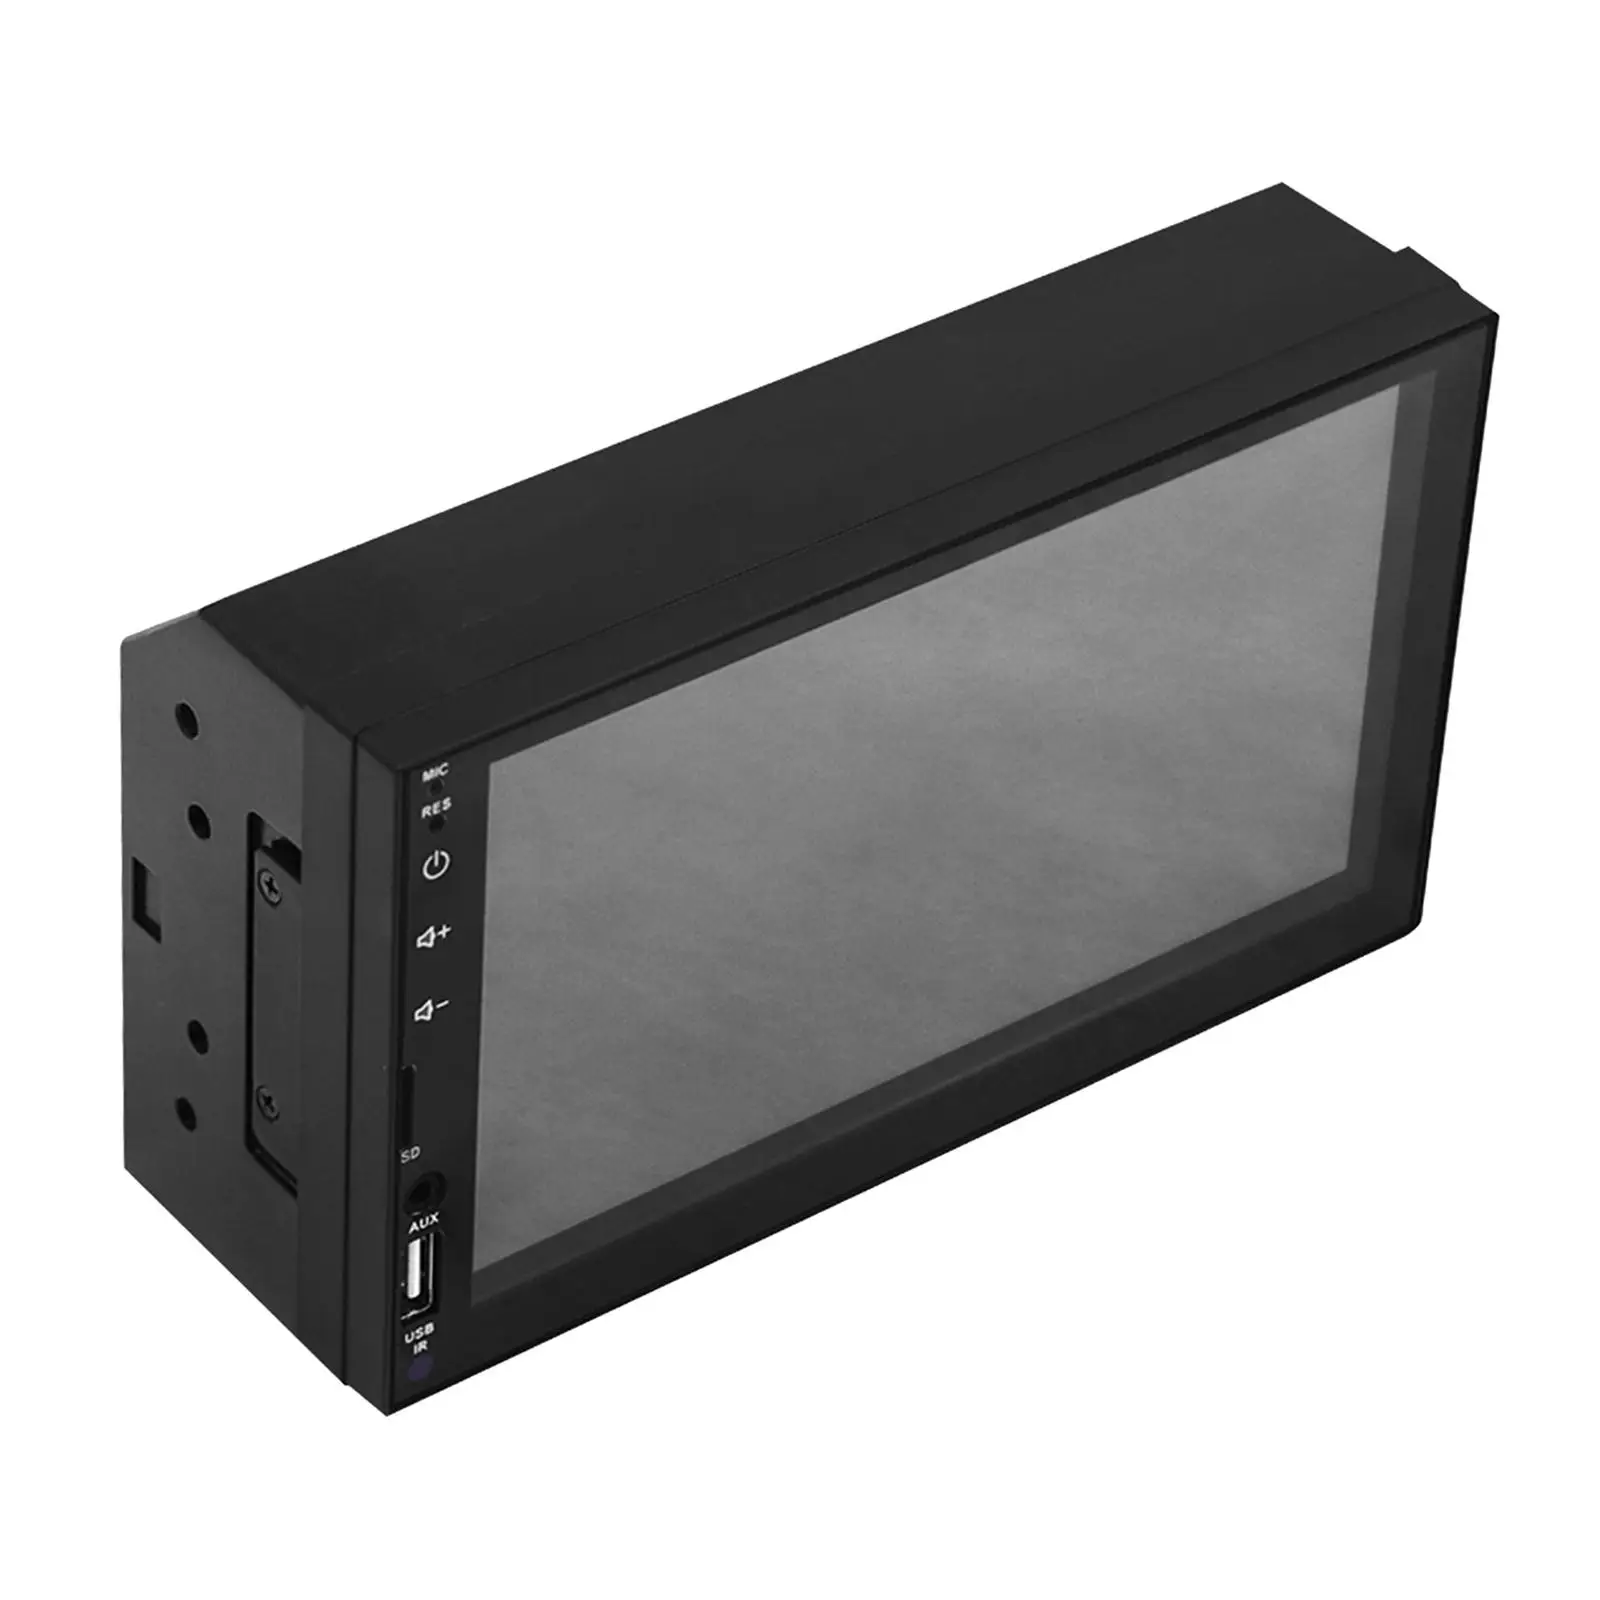 Double Din Car Stereo Bluetooth Car Audio, 7 ``Capacitive Touch Screen Car Radio Support FM/USB/TF with Remote Control